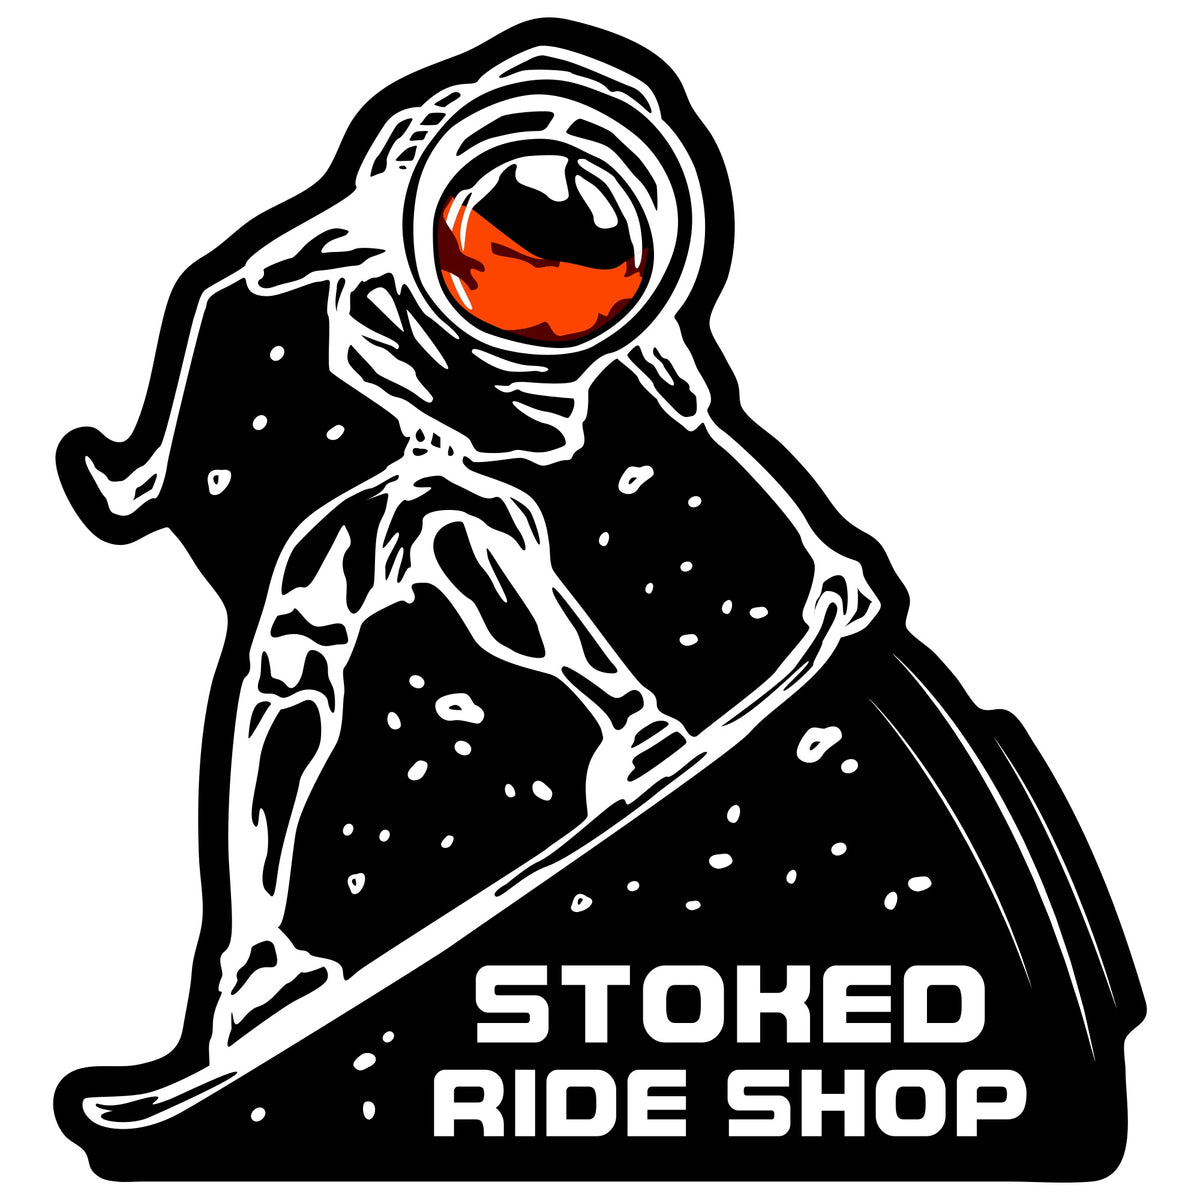 Stoked Ride Shop Space Man Sticker Series #1